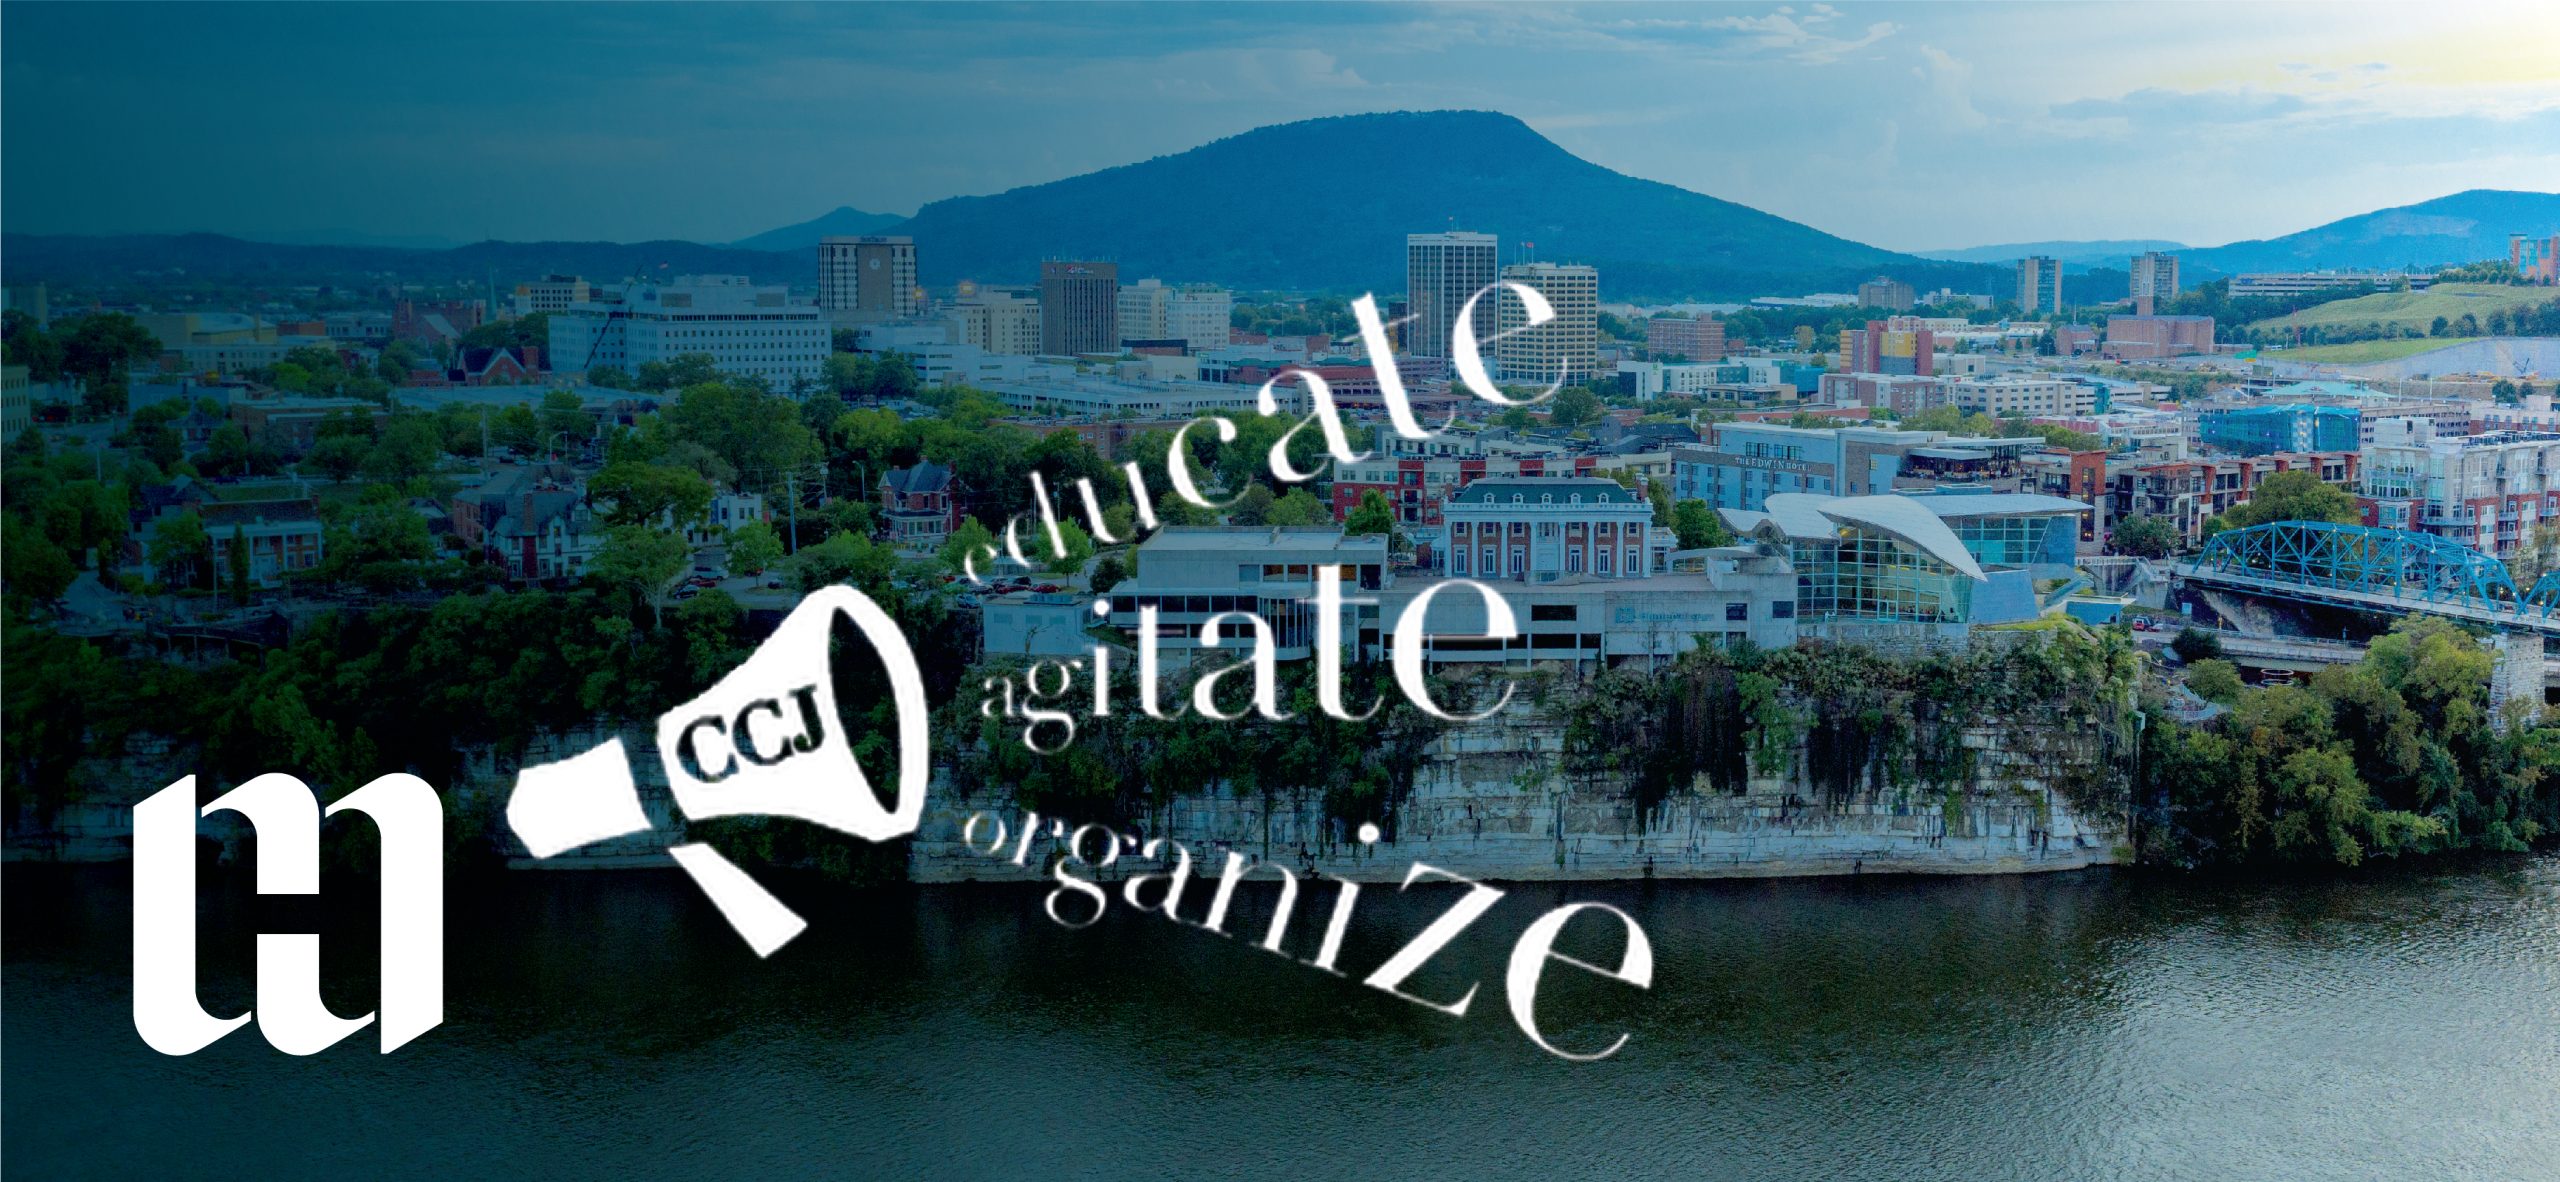 Background image of the Hunter Museum and the bluff. The river and other Chattanooga buildings are in view with the text, "educate, agitate, organize."